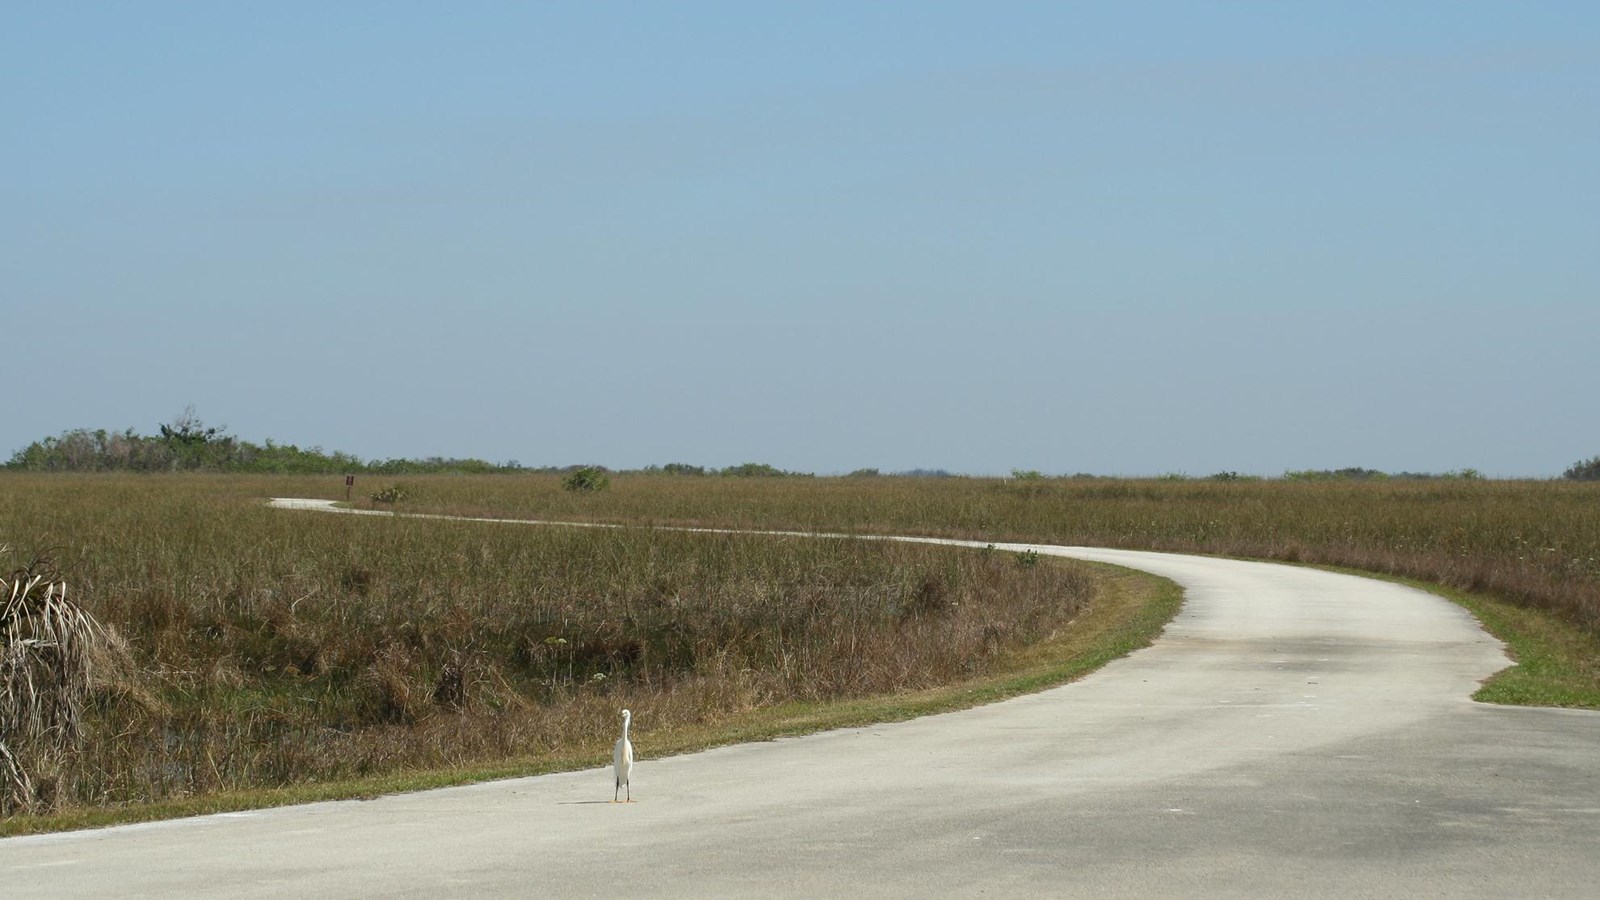 A concrete paved road winds through a sawgrass prairie. A white cattle egret stands on road